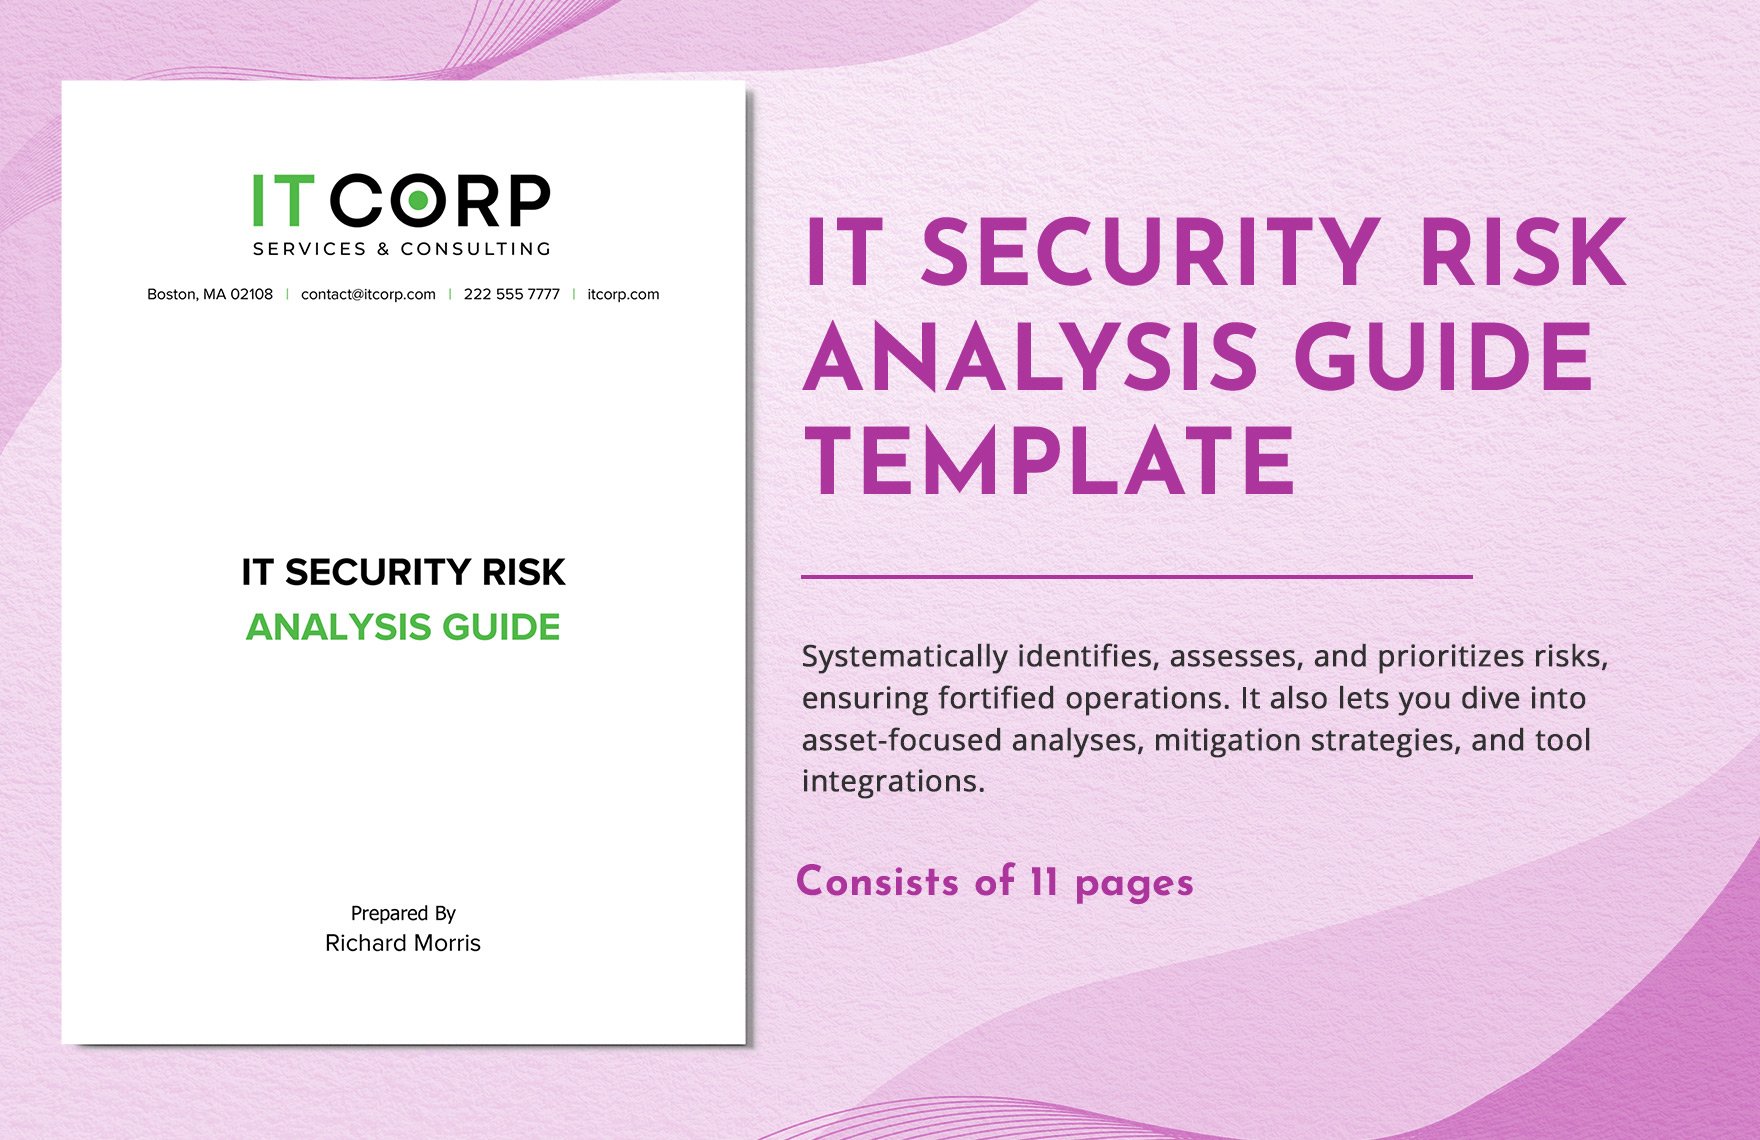 IT Security Risk Analysis Guide Template